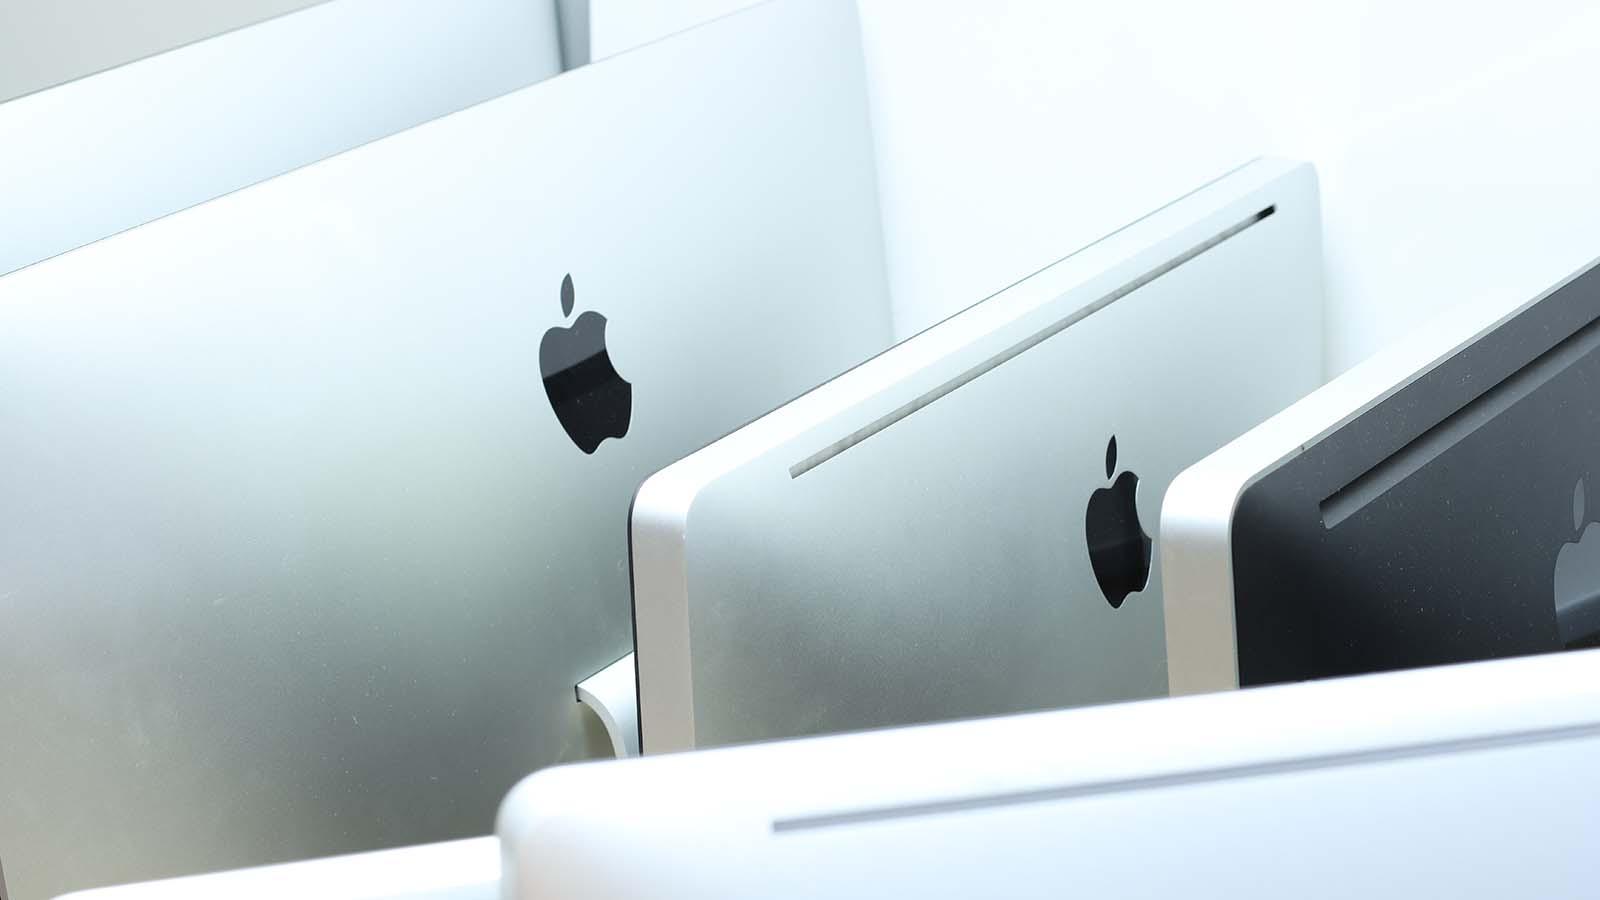 Apple Computers in a row